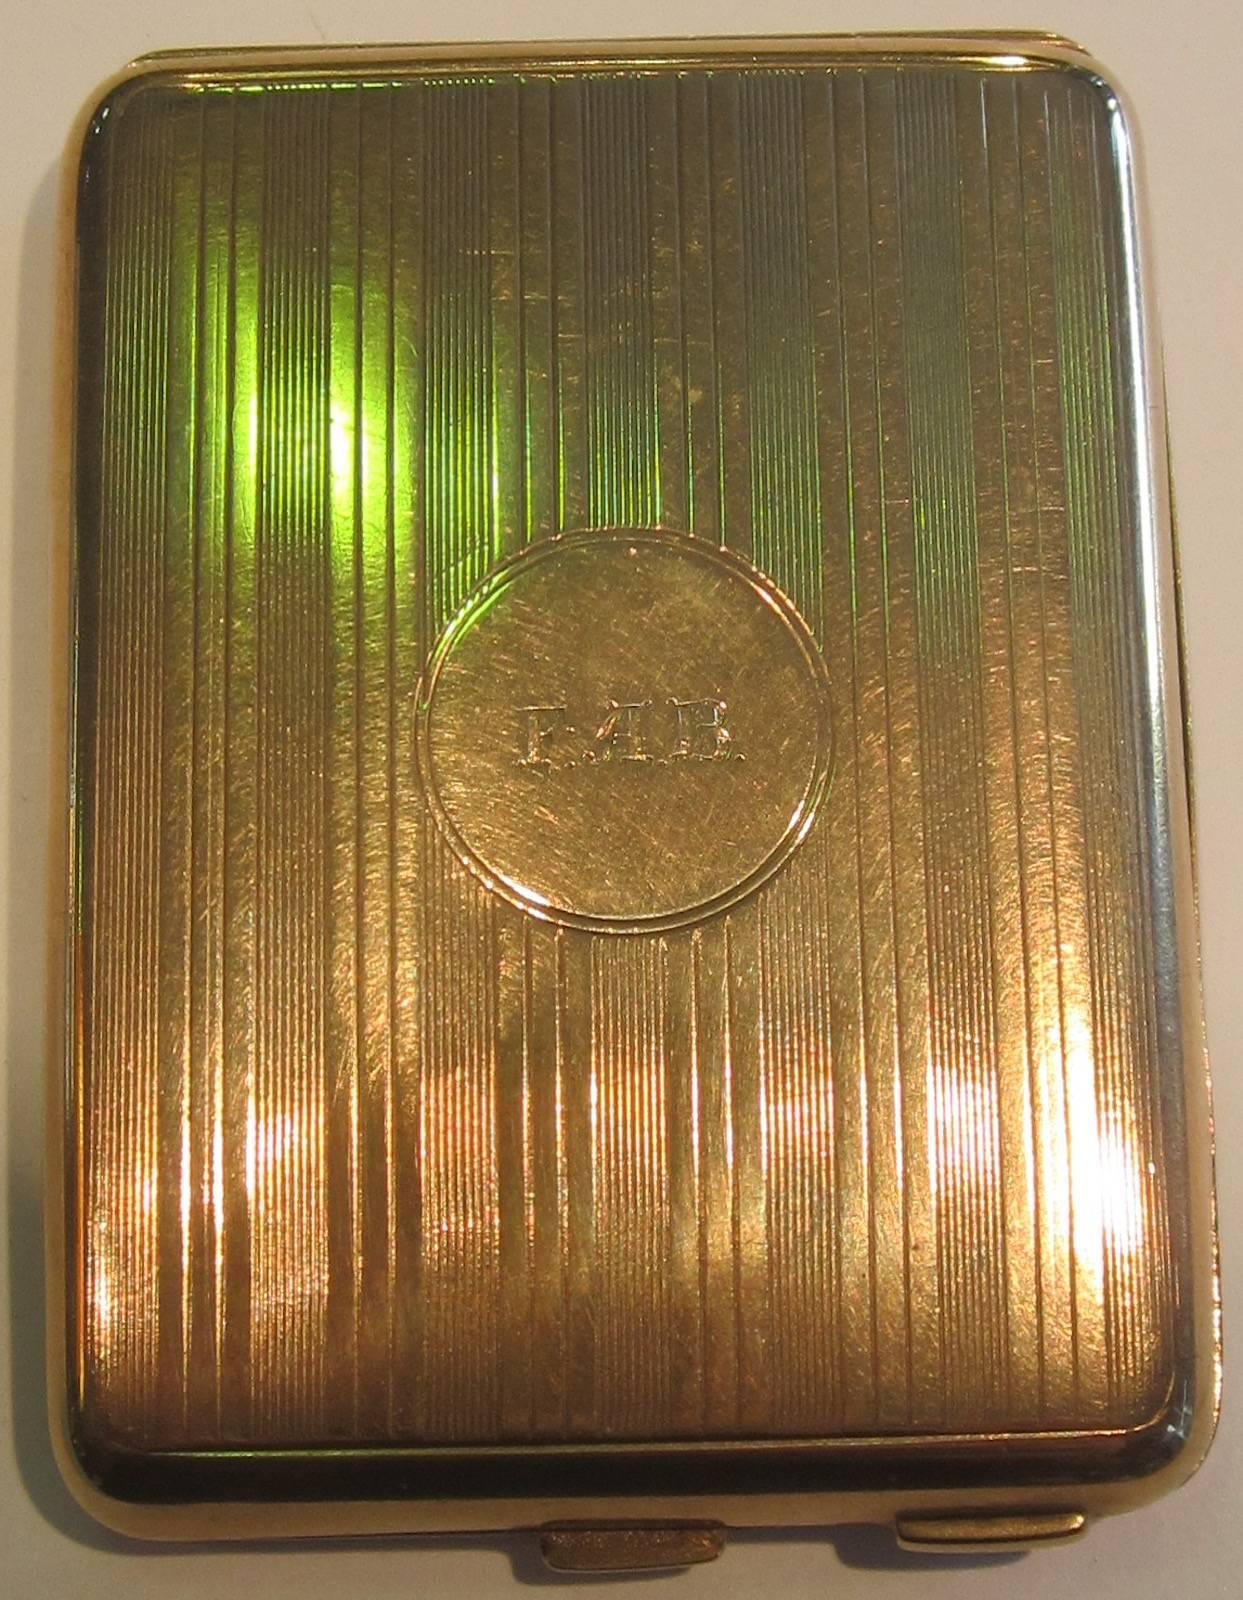 9-carat gold match case,
hallmarked Birmingham 1946 and marked 9 .375,
makers mark HM
27 grams.